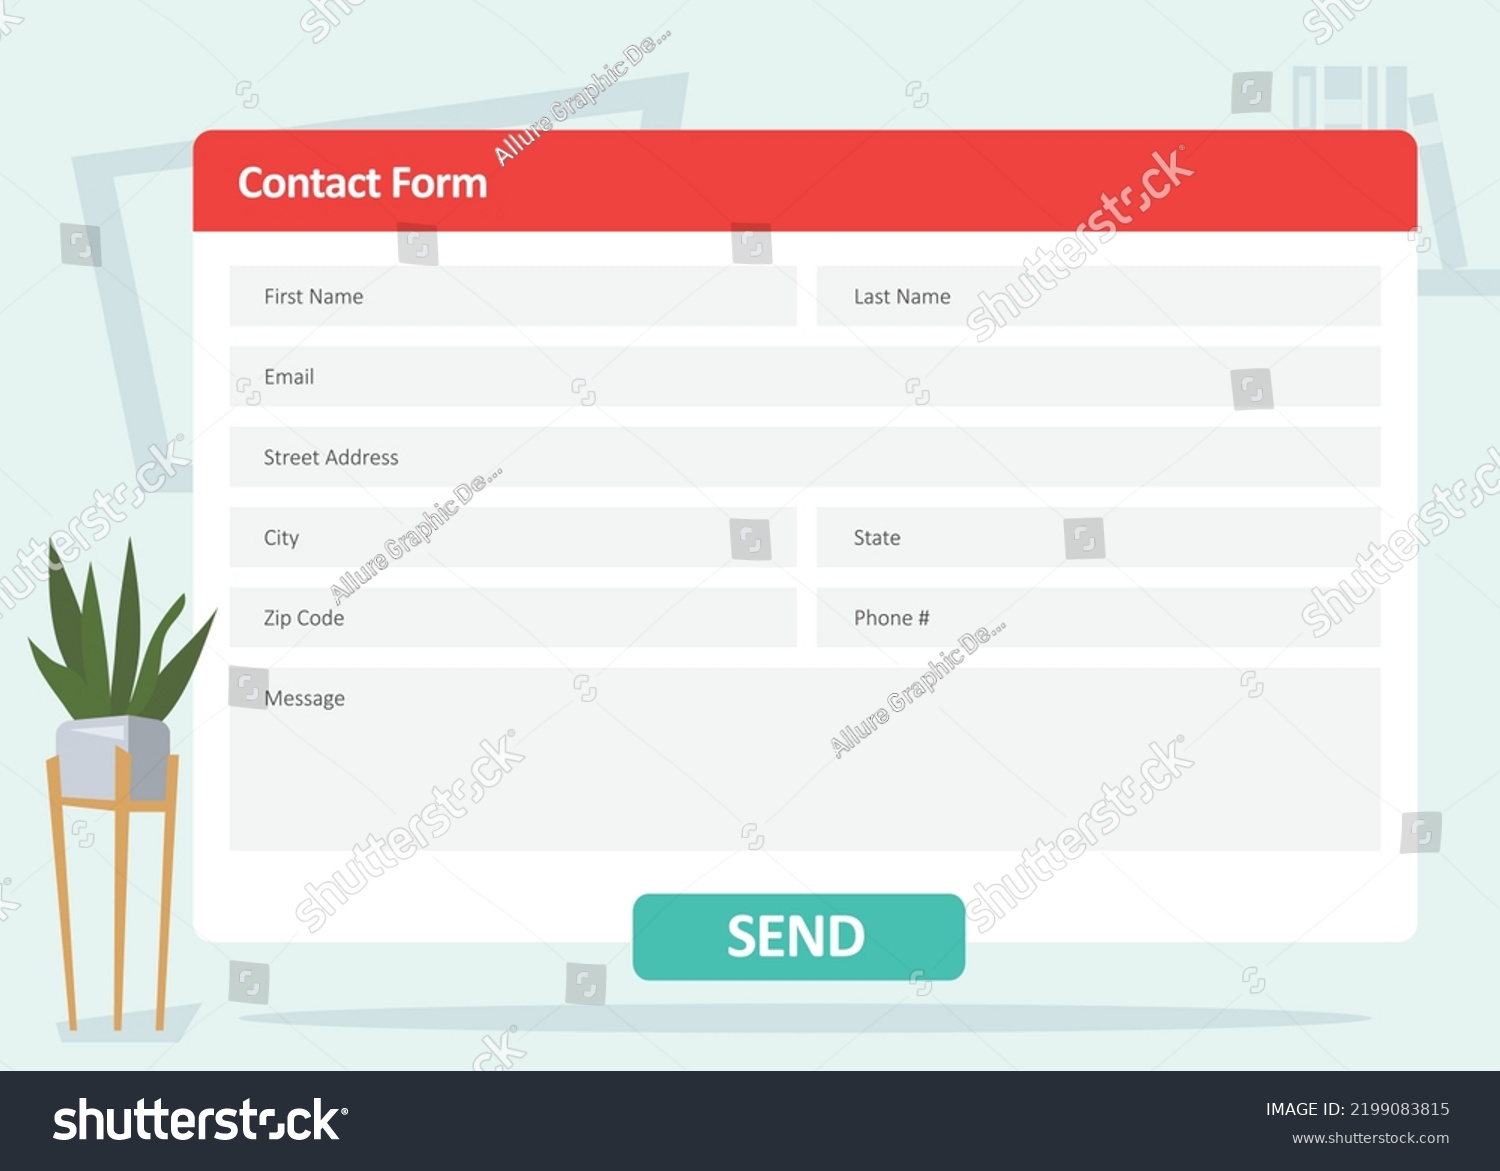 Contact Form with Fields and Send Button #2199083815